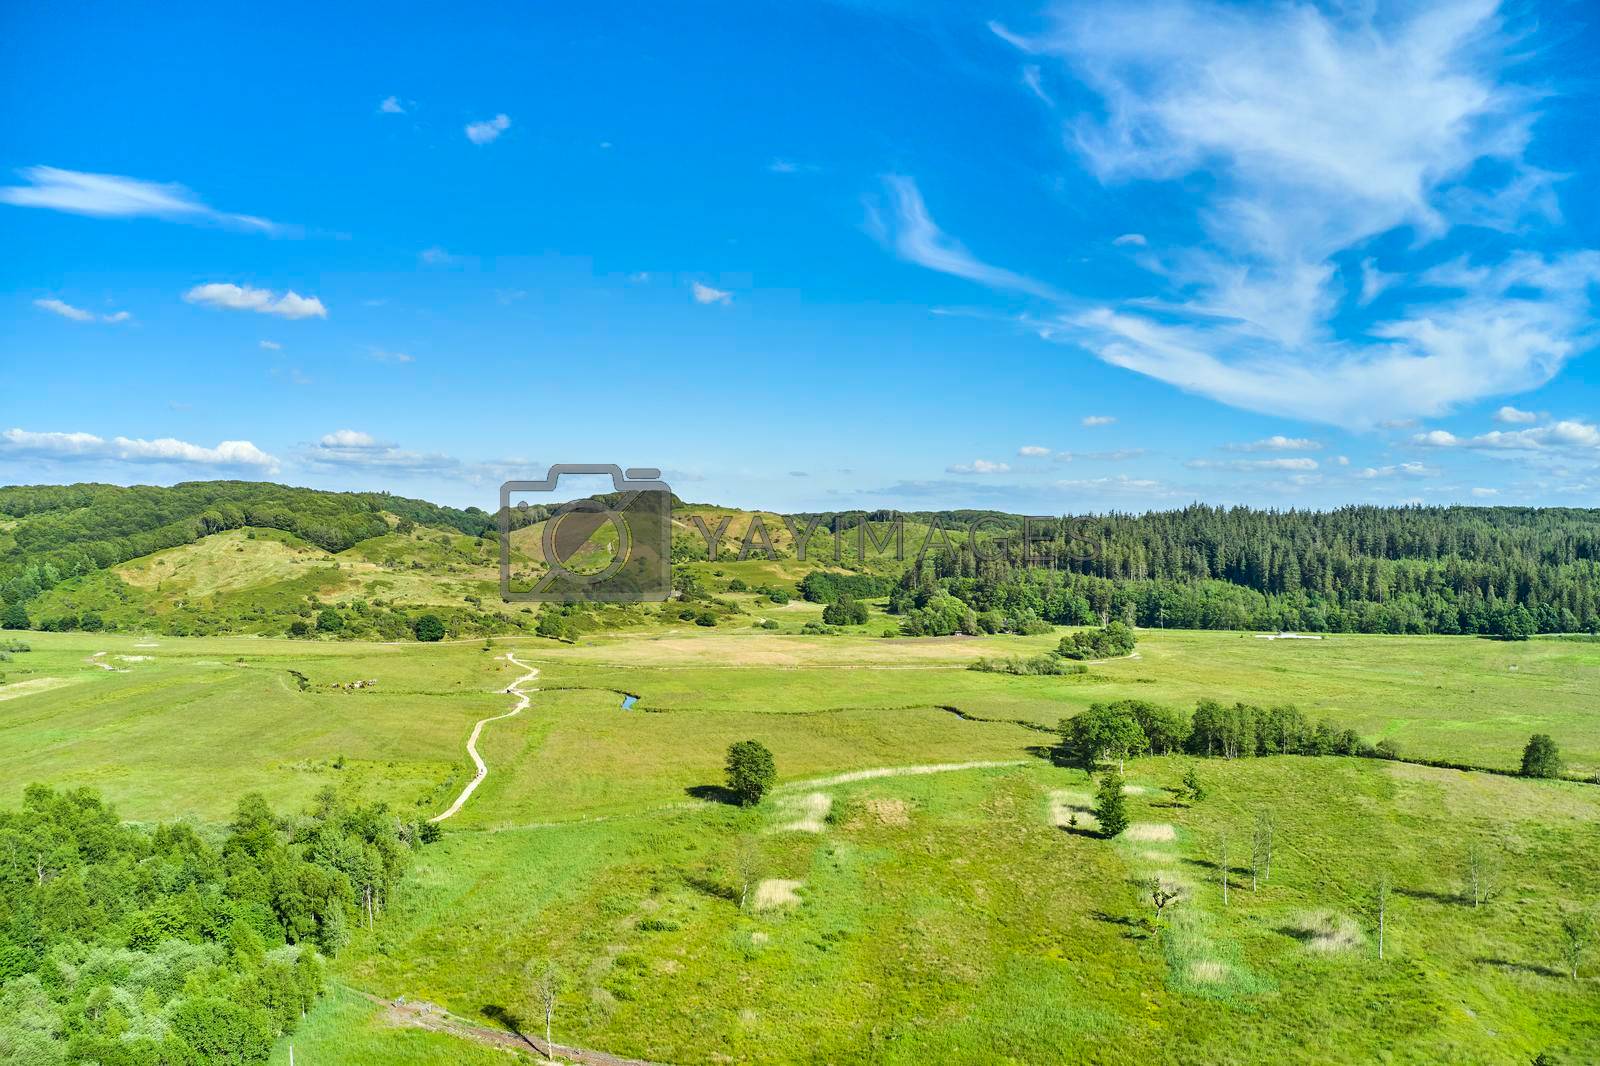 Landscape of a countryside with a cloudy blue sky and copyspace. Wide drone view of green forestry and cultivated grassland. Beautiful landscape of flat land surrounded by forest trees with copyspace.